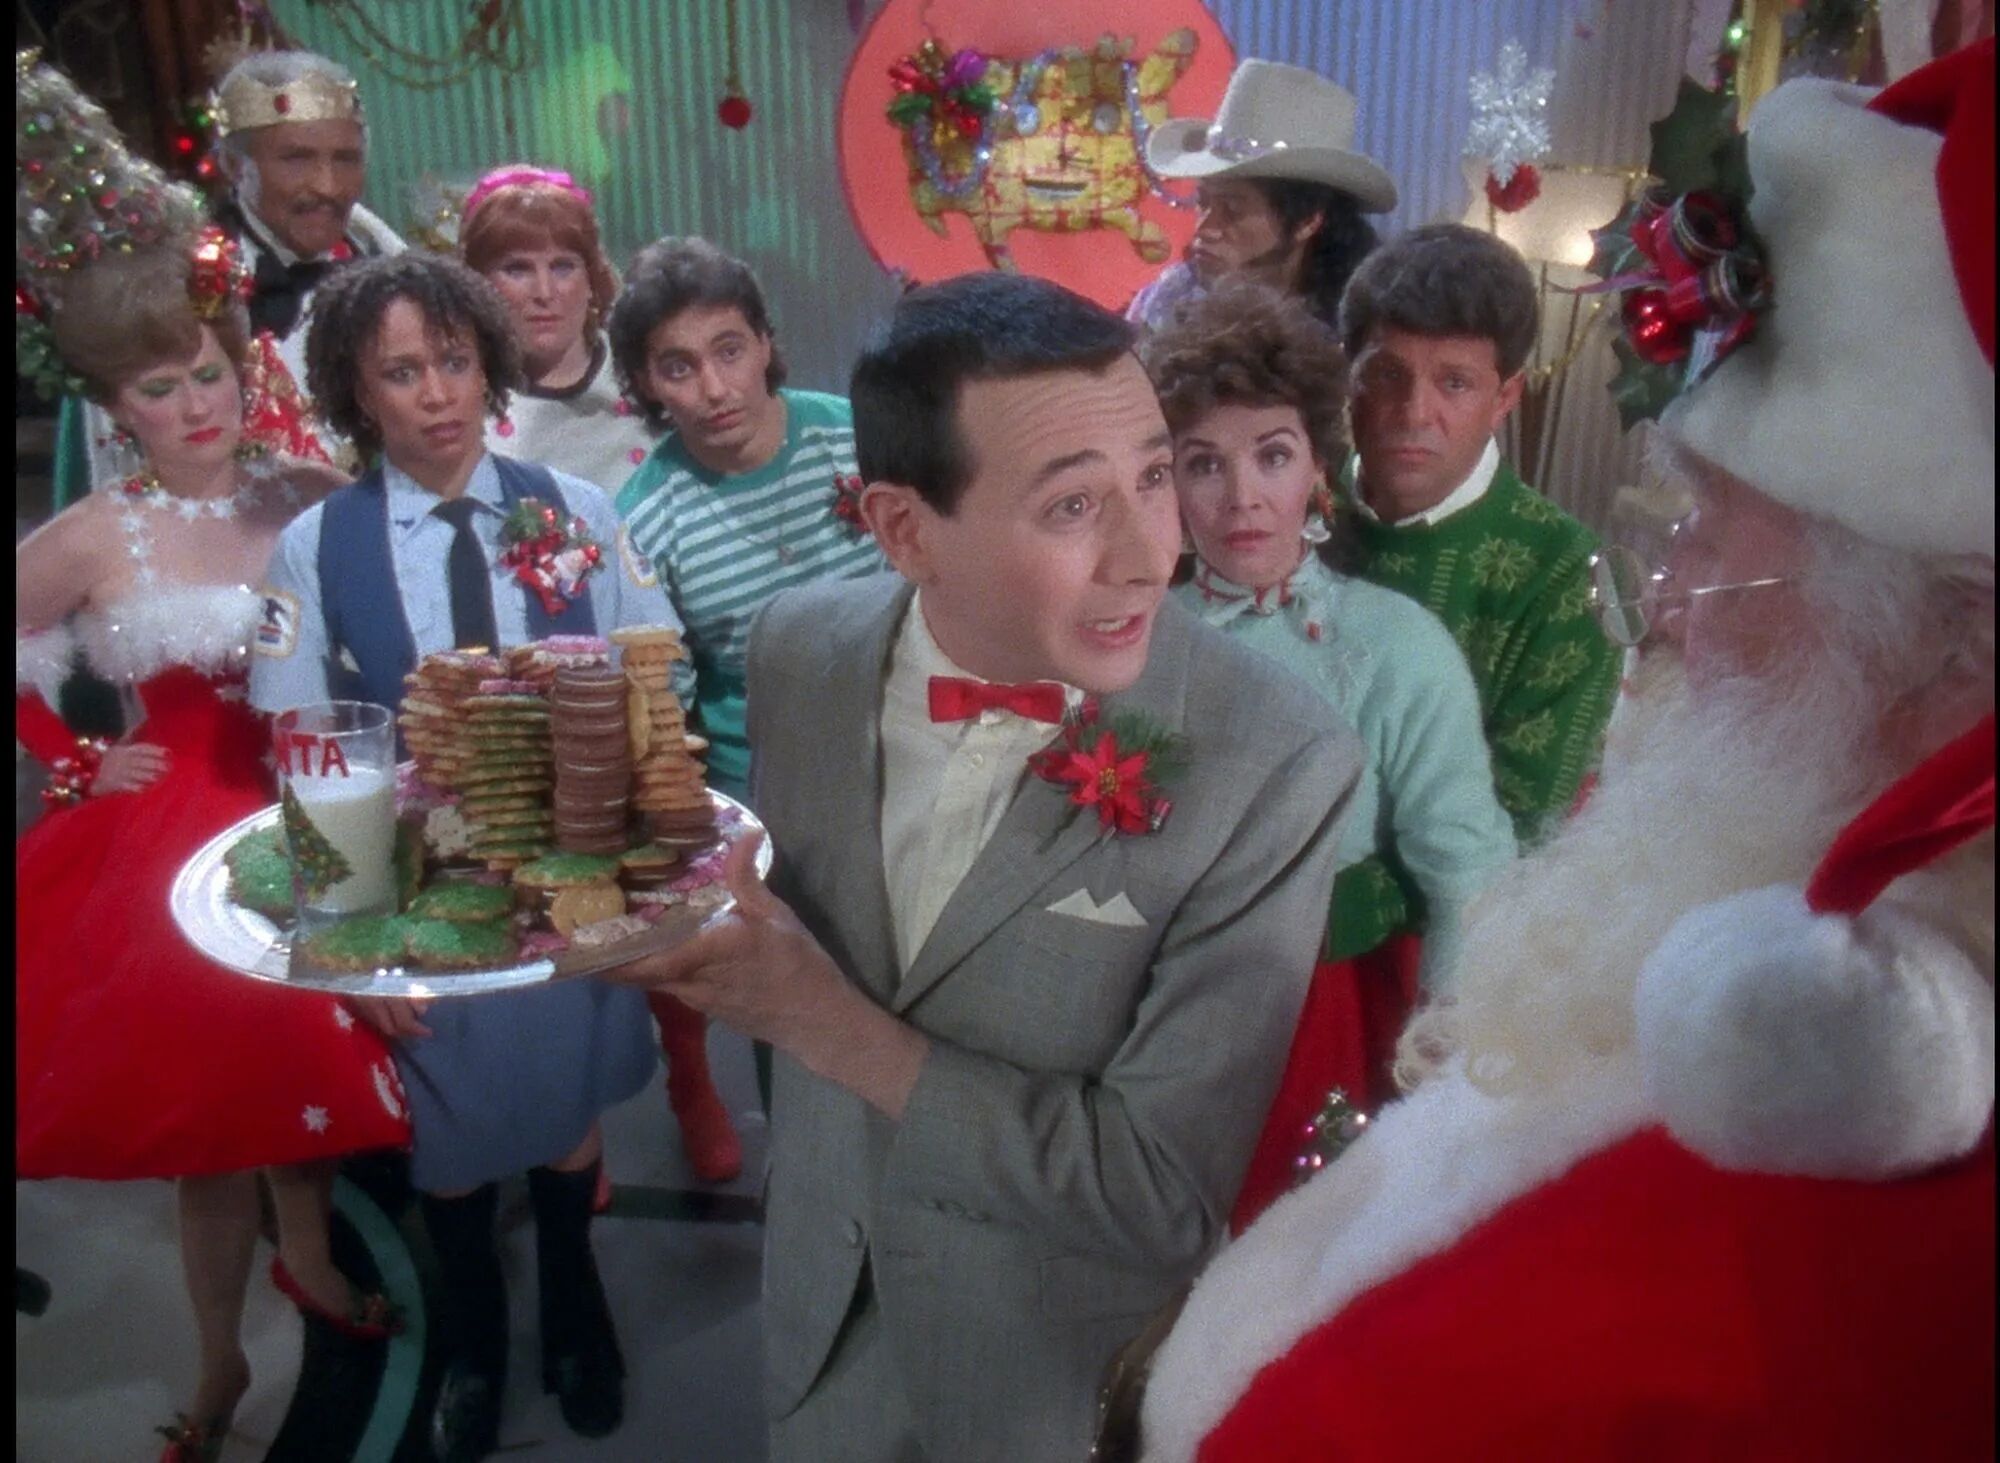 Paul Reubens in Pee Wee’s Playhouse Christmas Special. His character, Pee Wee Herman, stands in front of Santa Claus holding a plate full of cookies and milk. He has a confused look on his face and is surrounded by friends. 